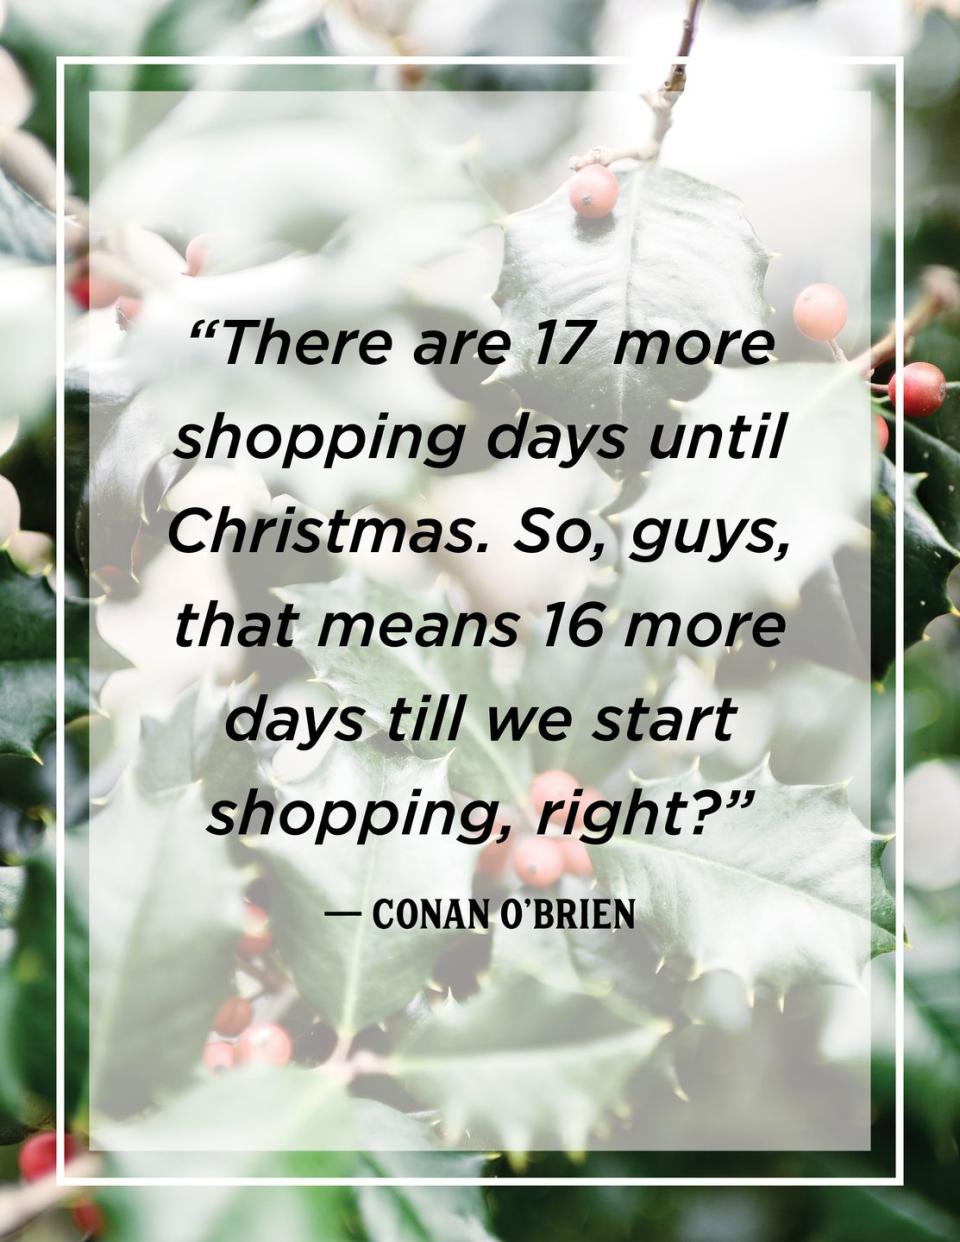 <p>"There are 17 more shopping days until Christmas. So, guys, that means 16 more days till we start shopping, right?"</p>